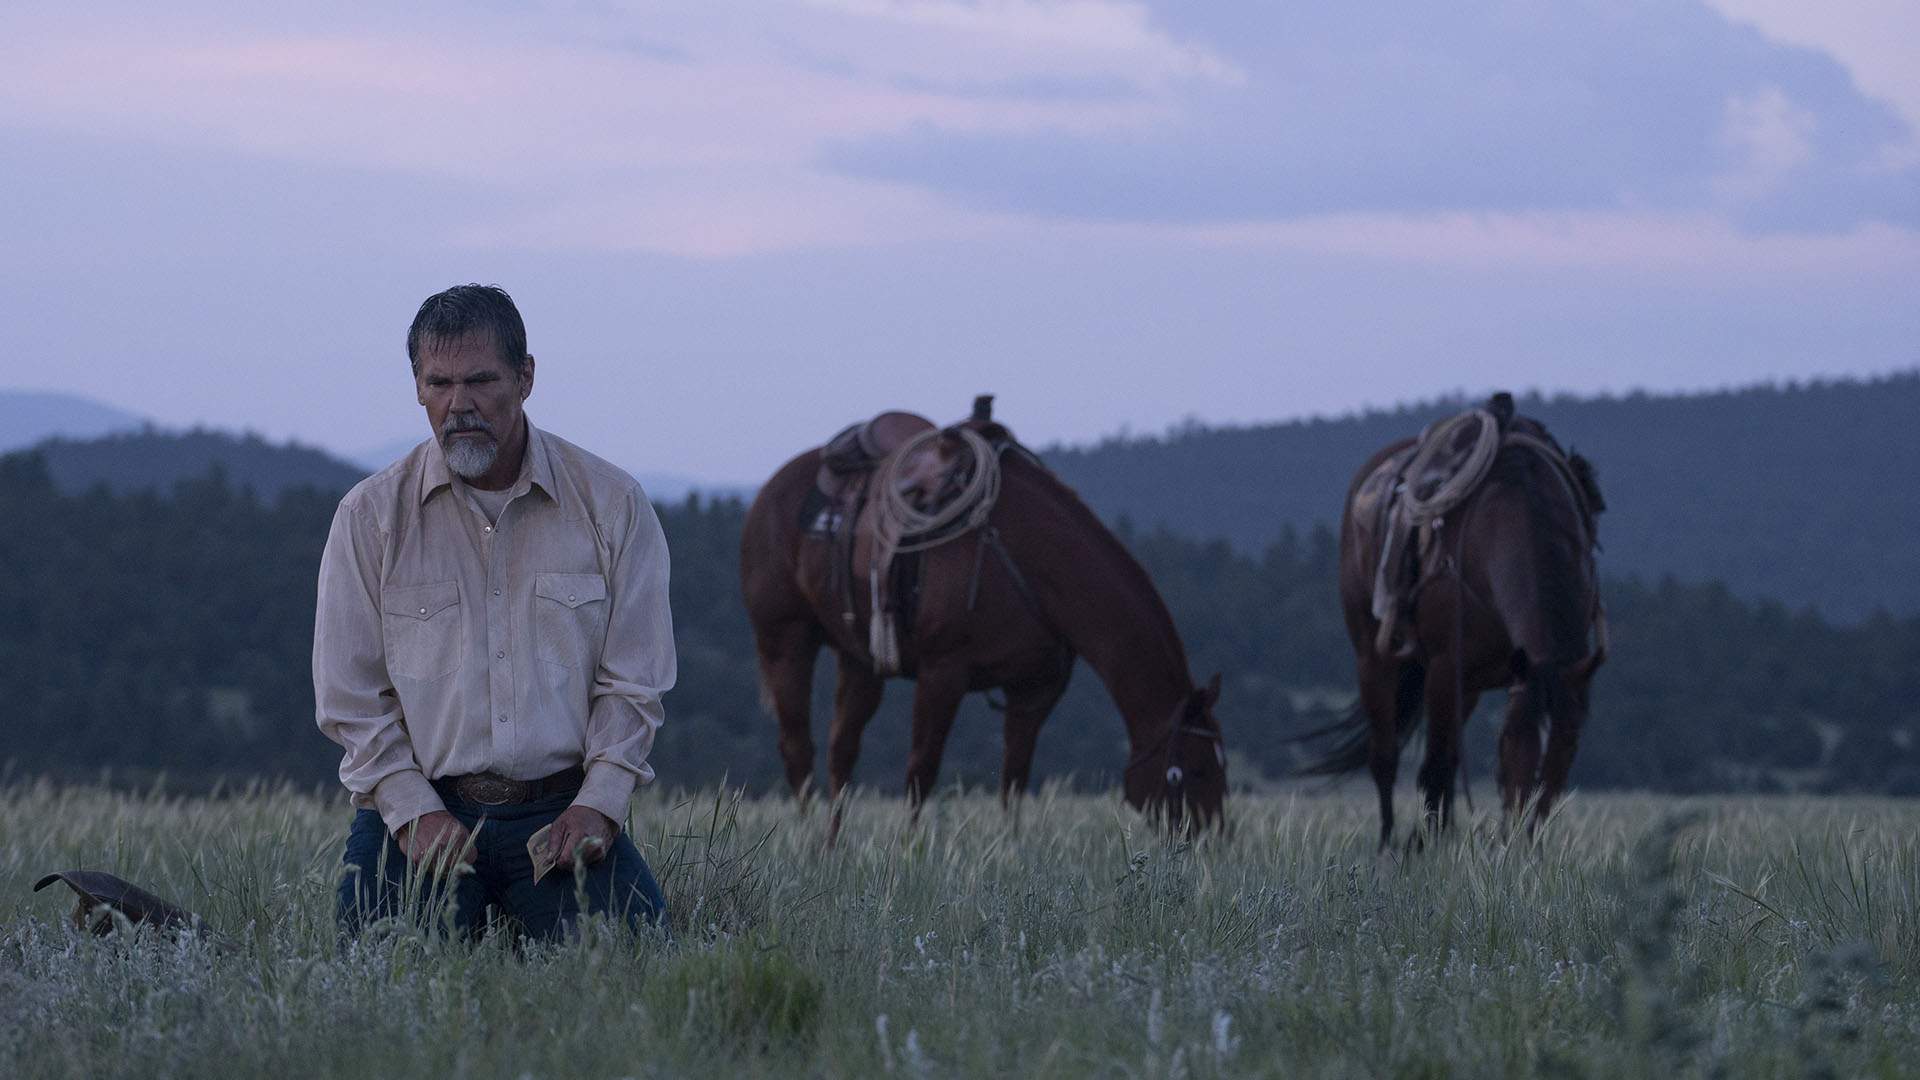 A Western, an Offbeat Mystery and Eerie Sci-Fi: That's New Josh Brolin-Starring Series 'Outer Range'